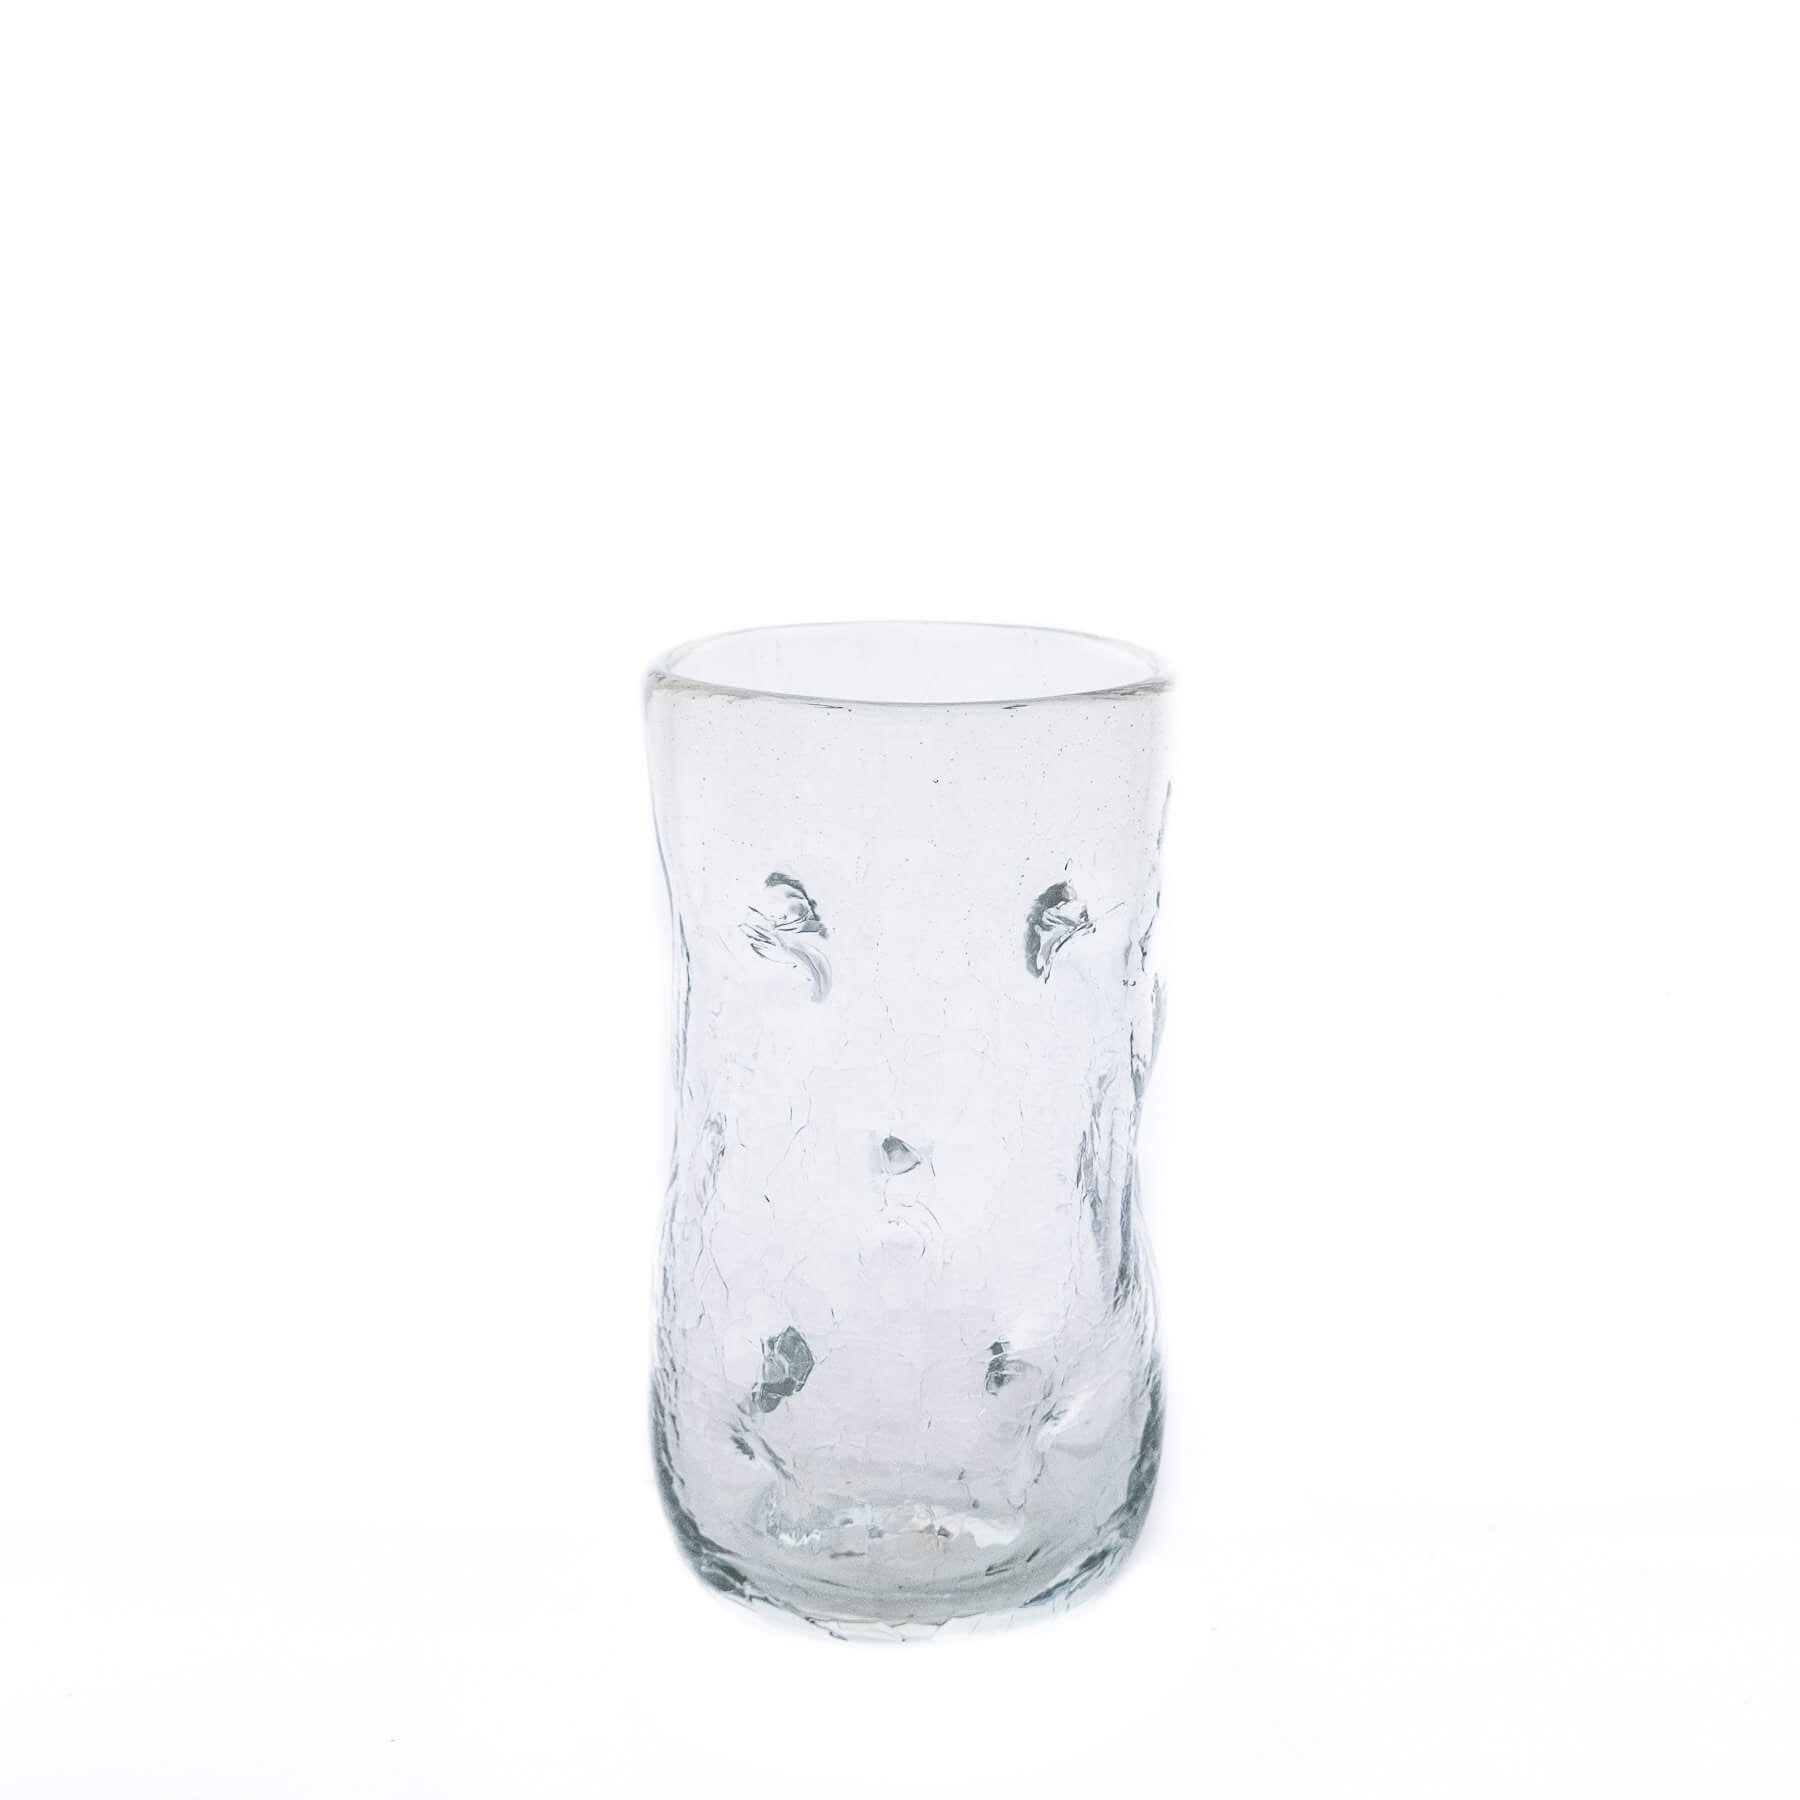 Product photo for Blenko 418LC Crackled Large Dimple Glass - Crystal